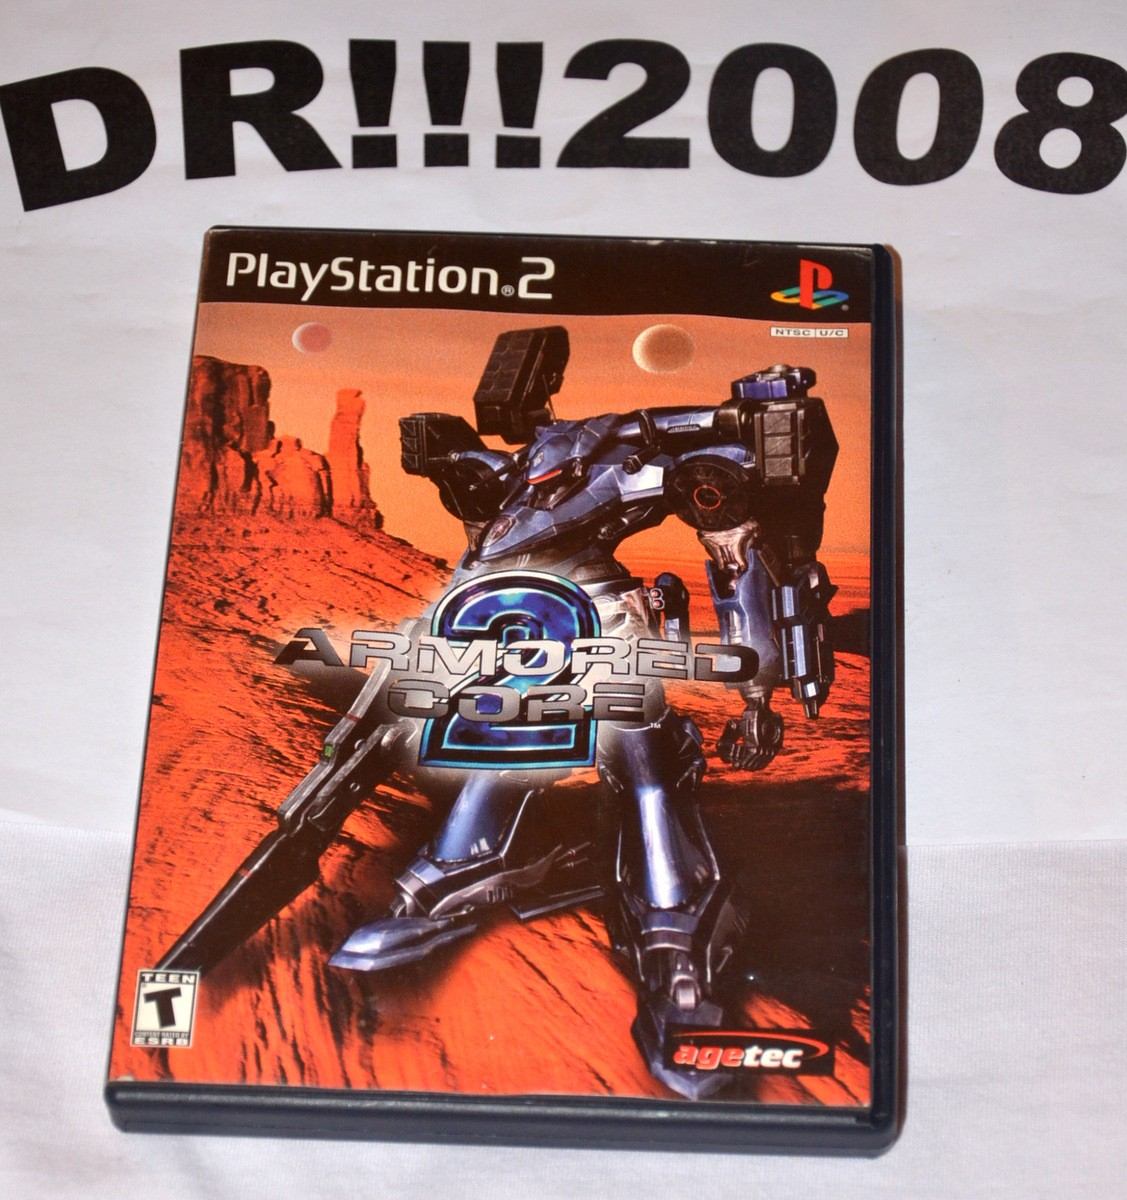 armored core psp vs ps2